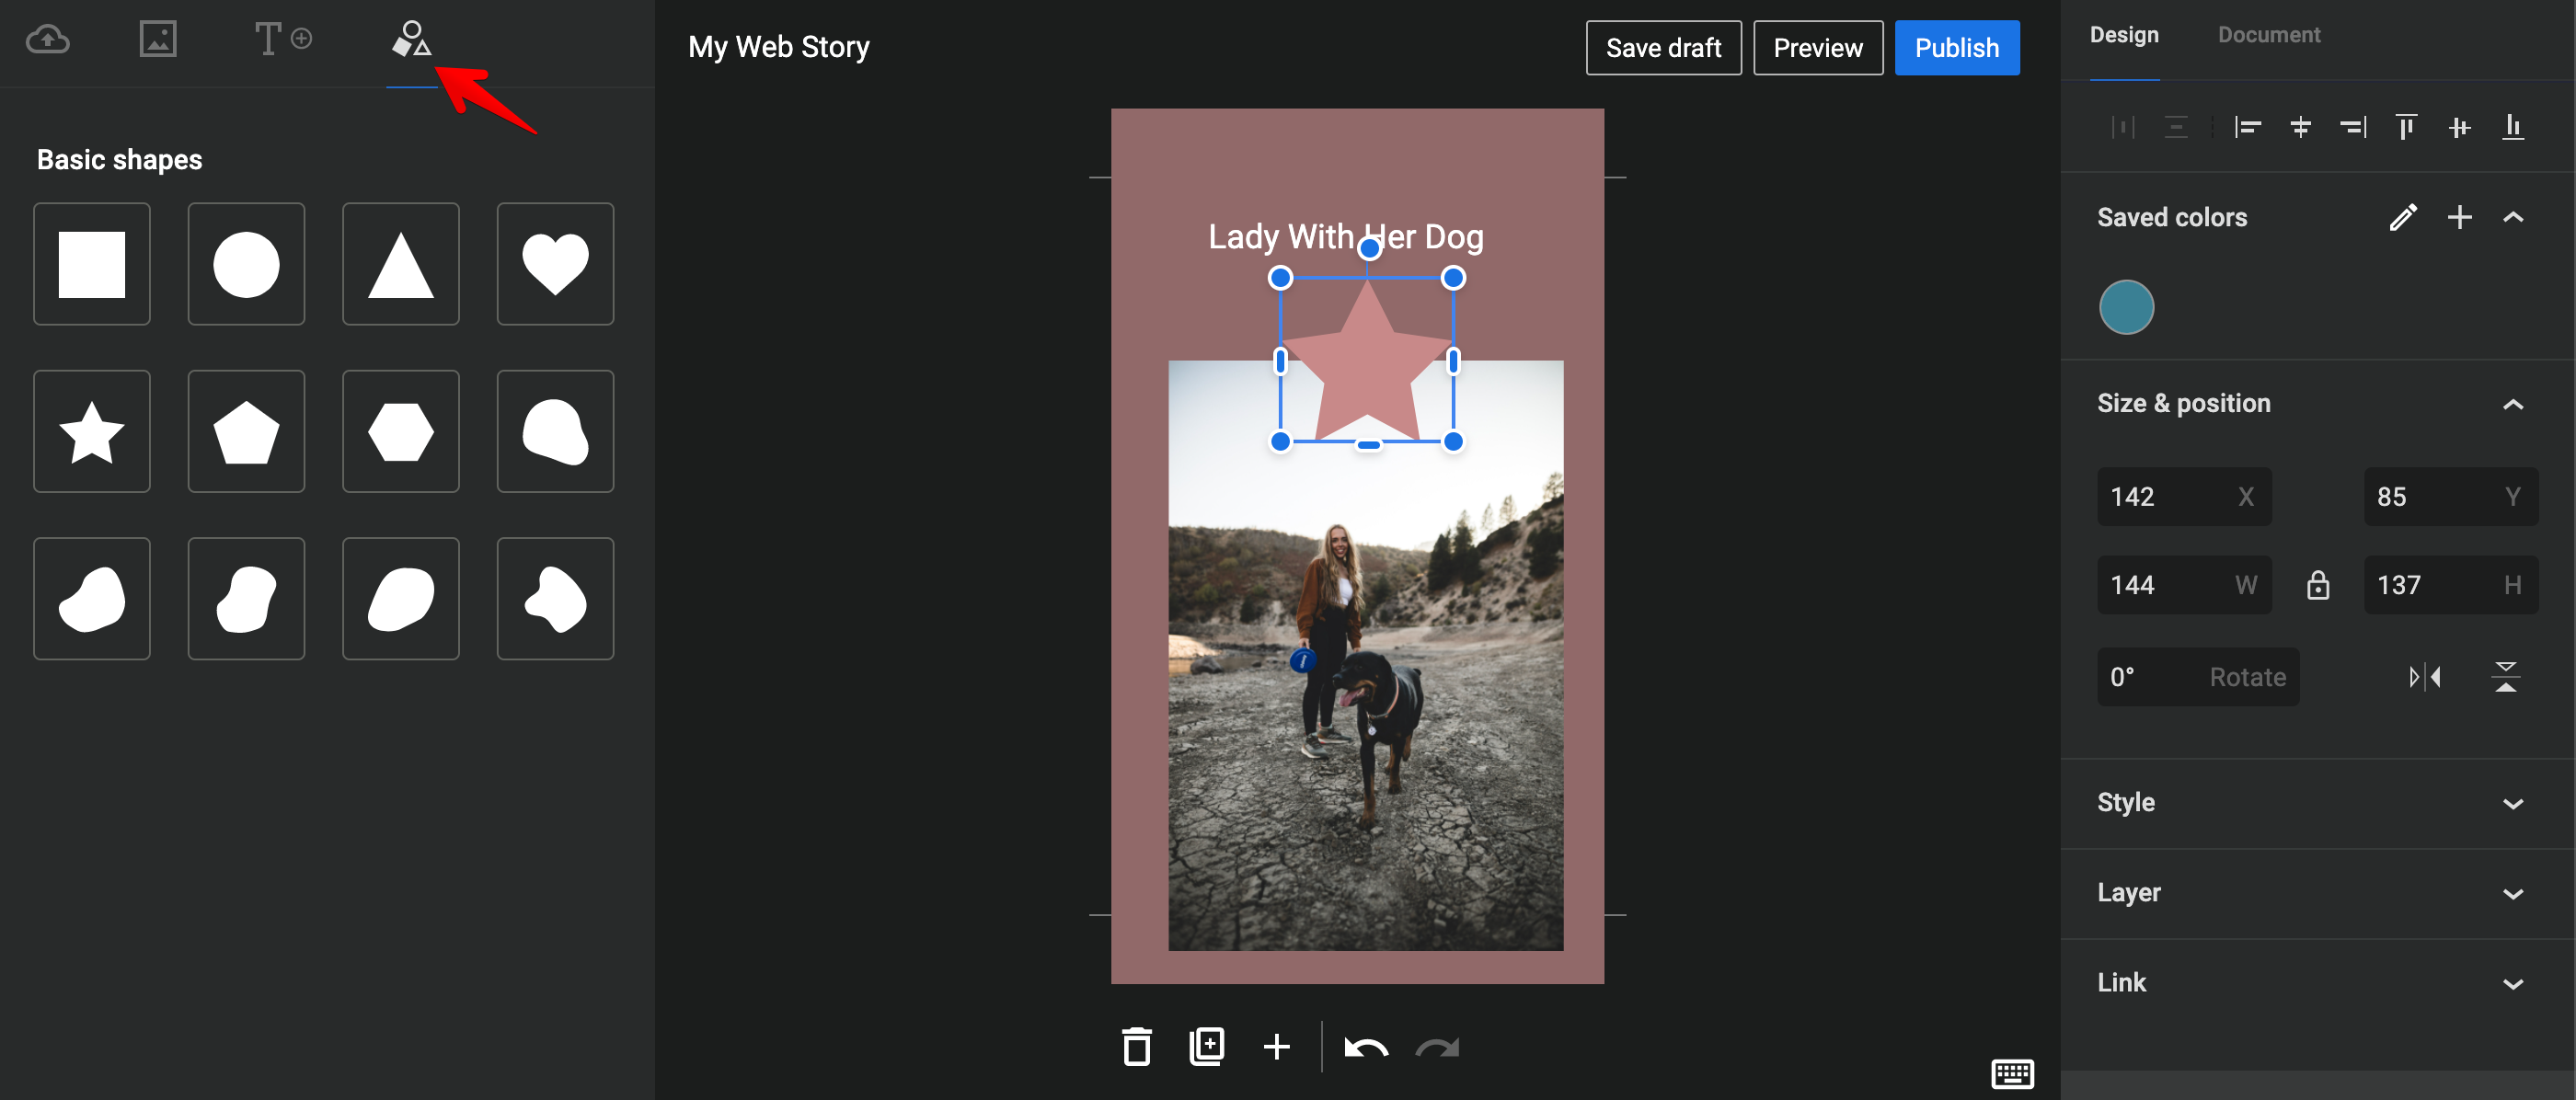 Adding elements on Web Stories for WordPress sites